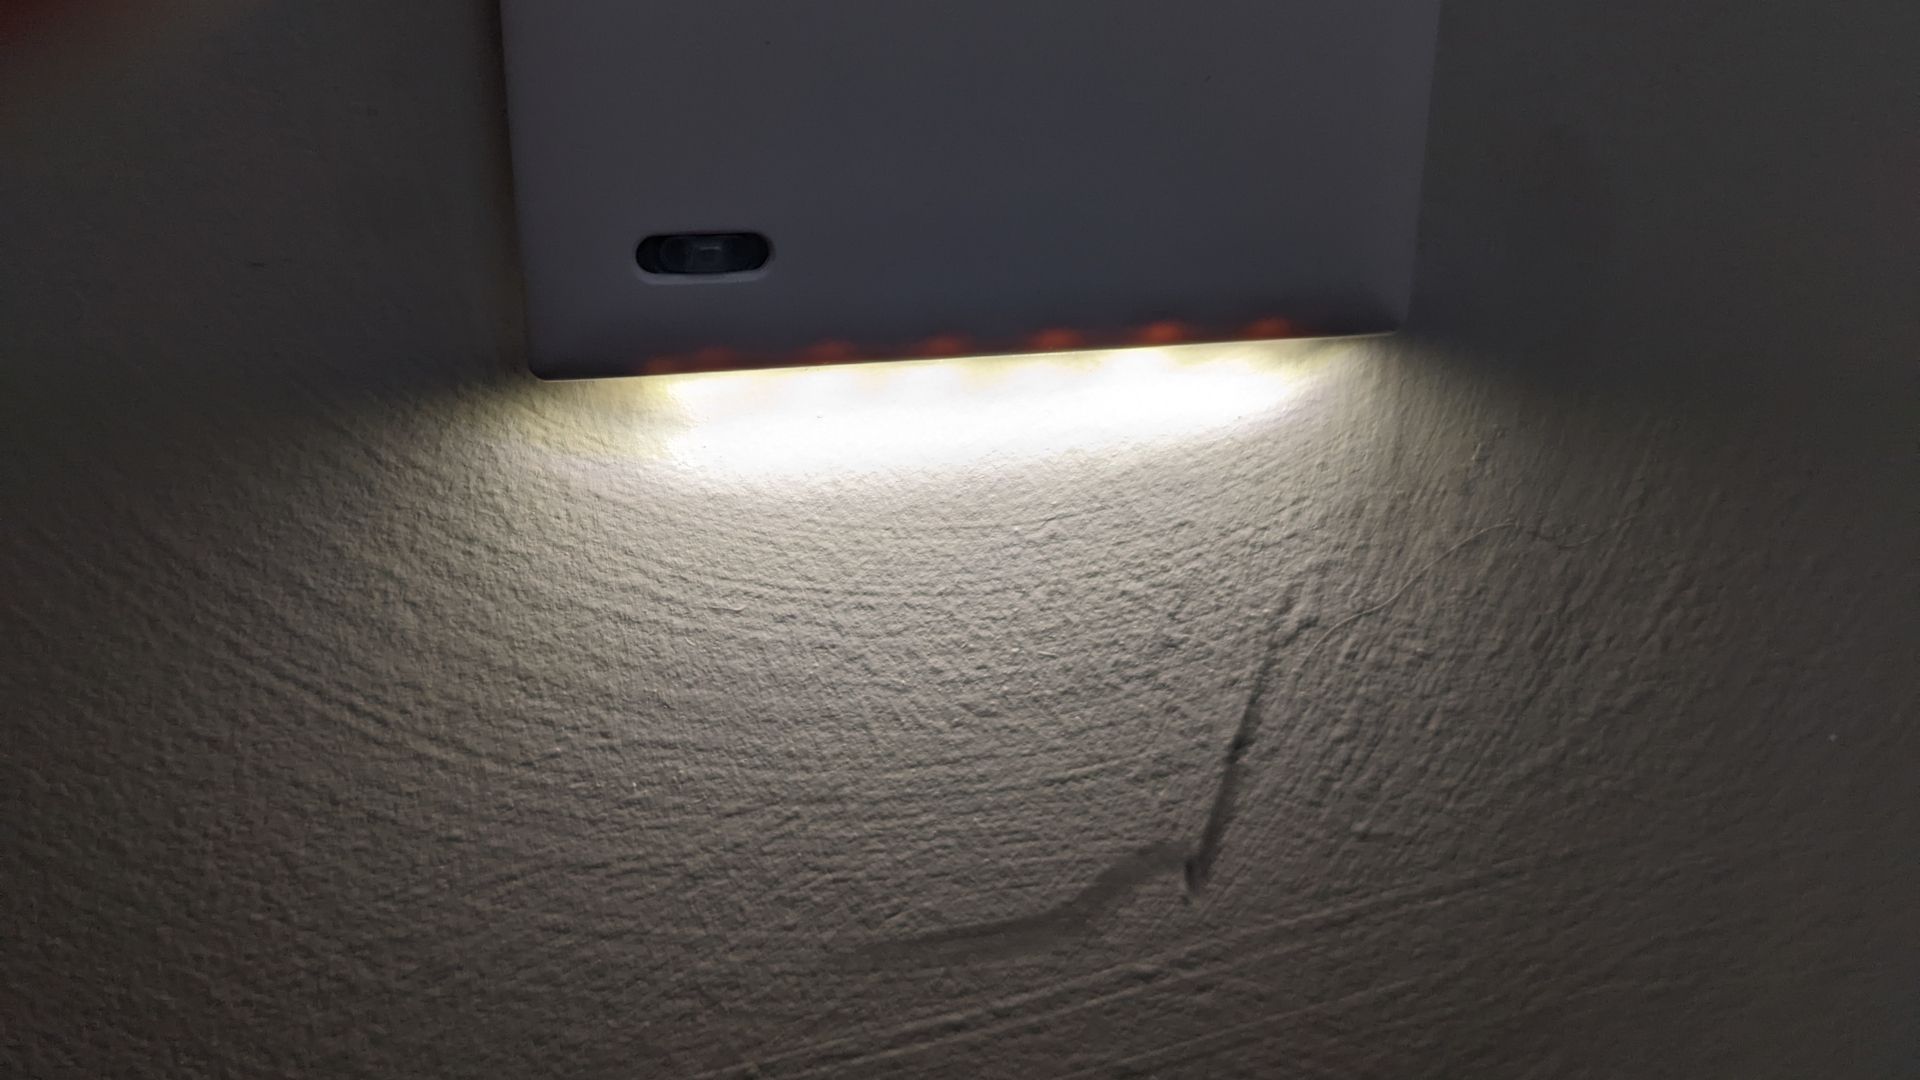 SnapPower LED Guidelight Night Light Working After Installation